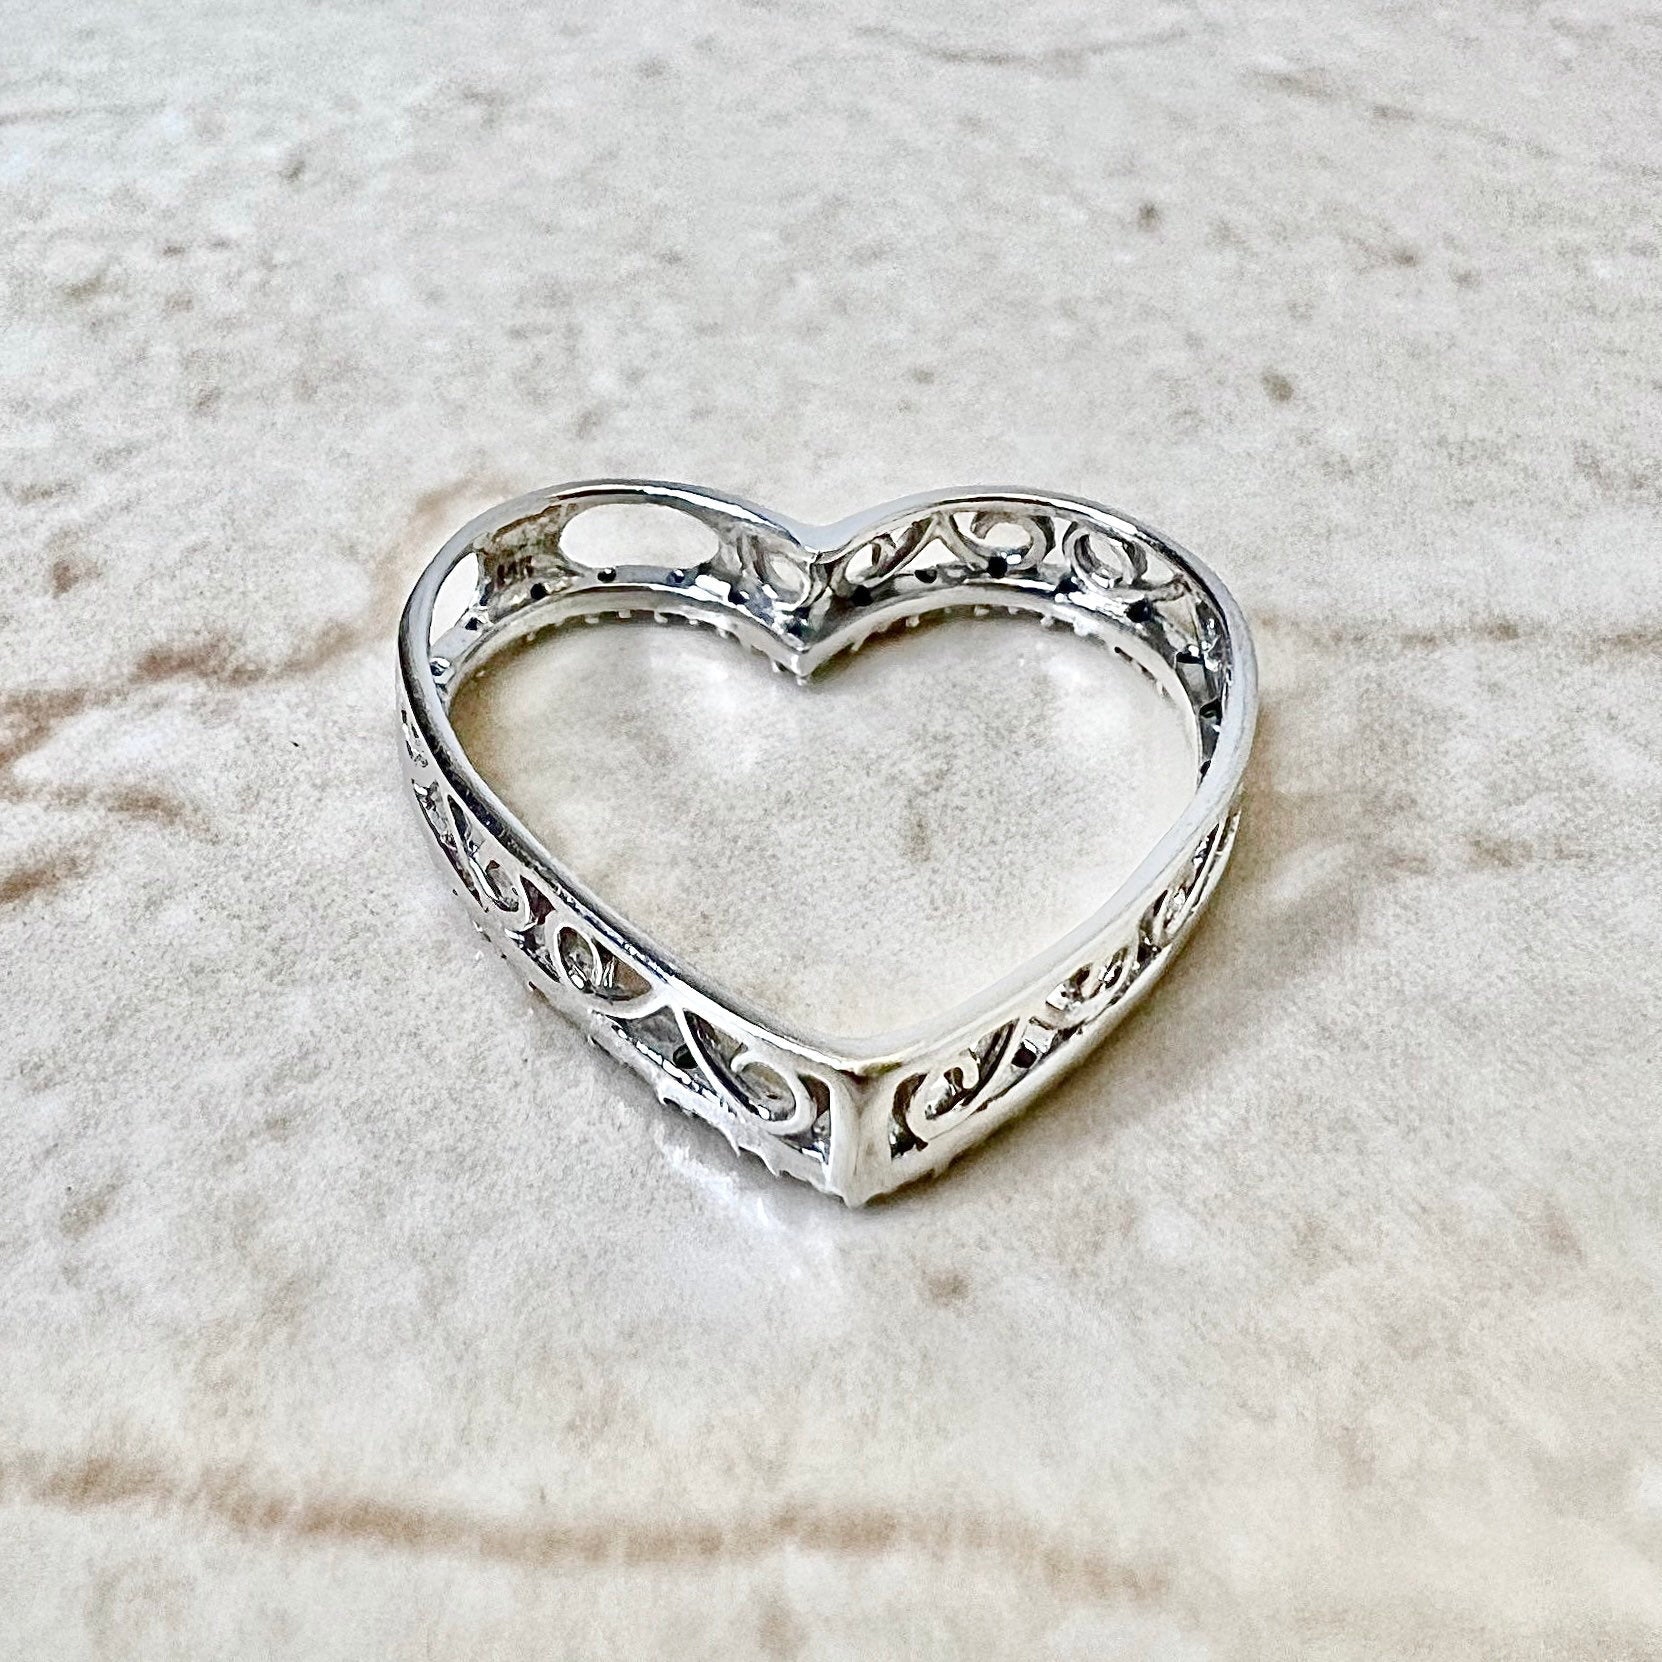 14K Diamond Heart Pendant Necklace - White Gold Diamond Pendant - 14K Solid Gold Heart Necklace - Best Gifts For Her - Mother’s Day Gifts